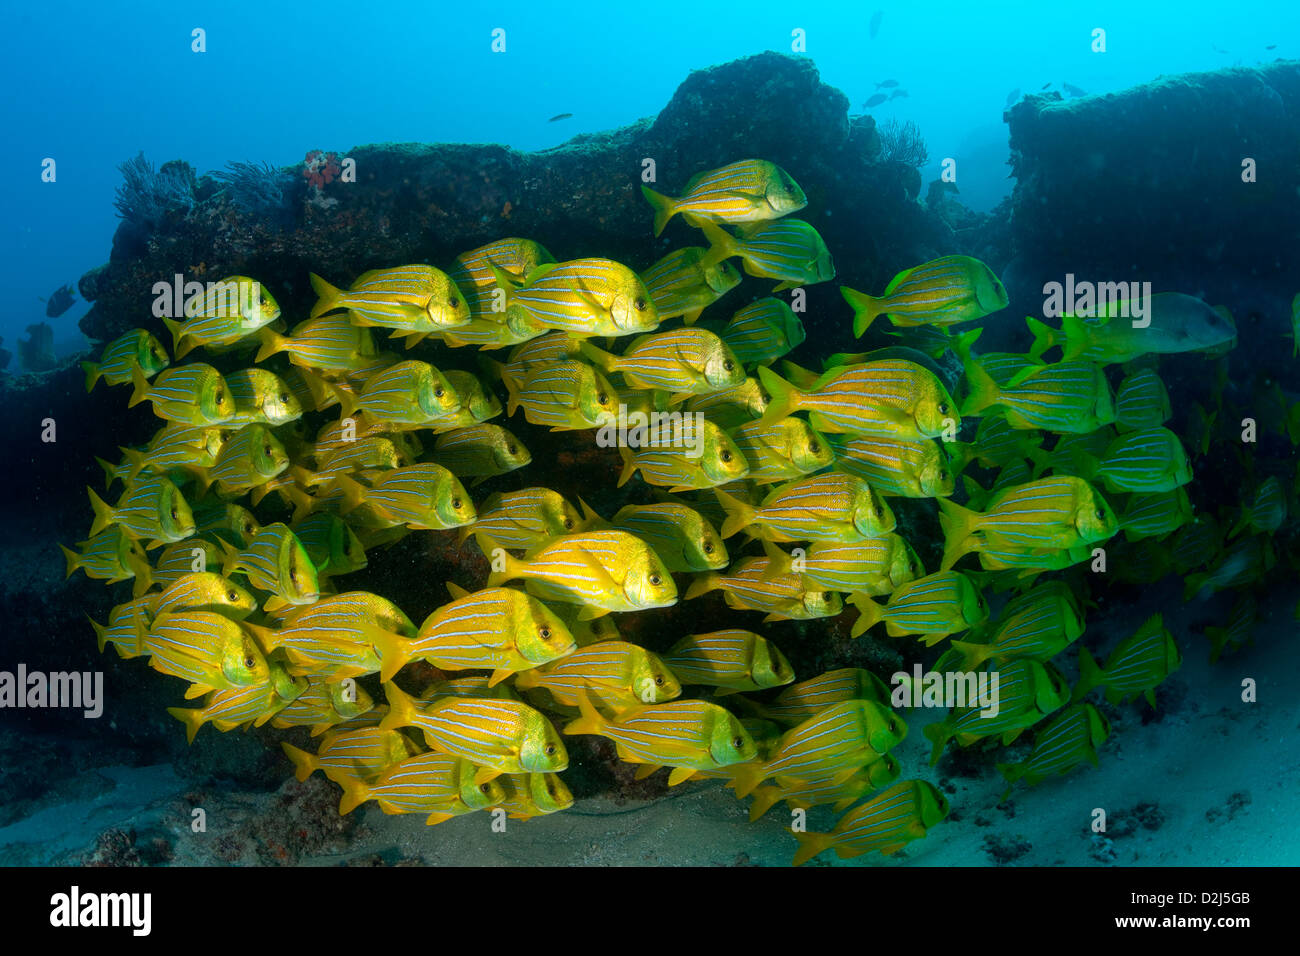 A large school of pork fish at Cabo Pulmo National Marine Park, Mexico. Stock Photo